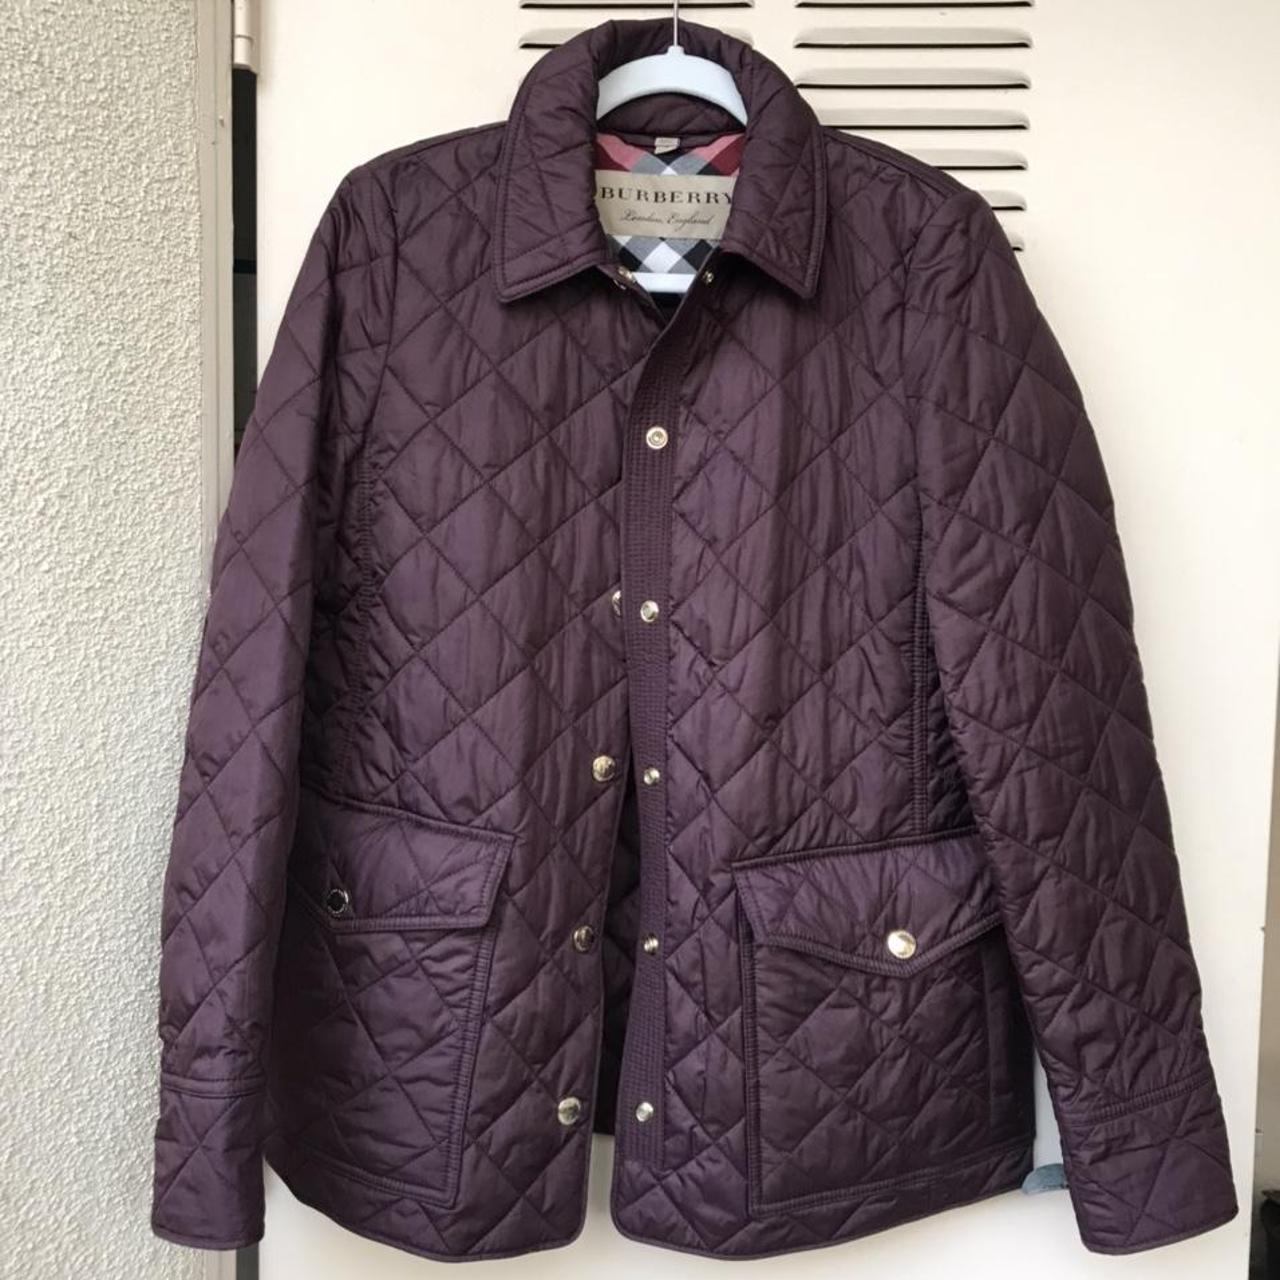 Authentic Burberry Burgundy Trench Coat Size Small... - Depop